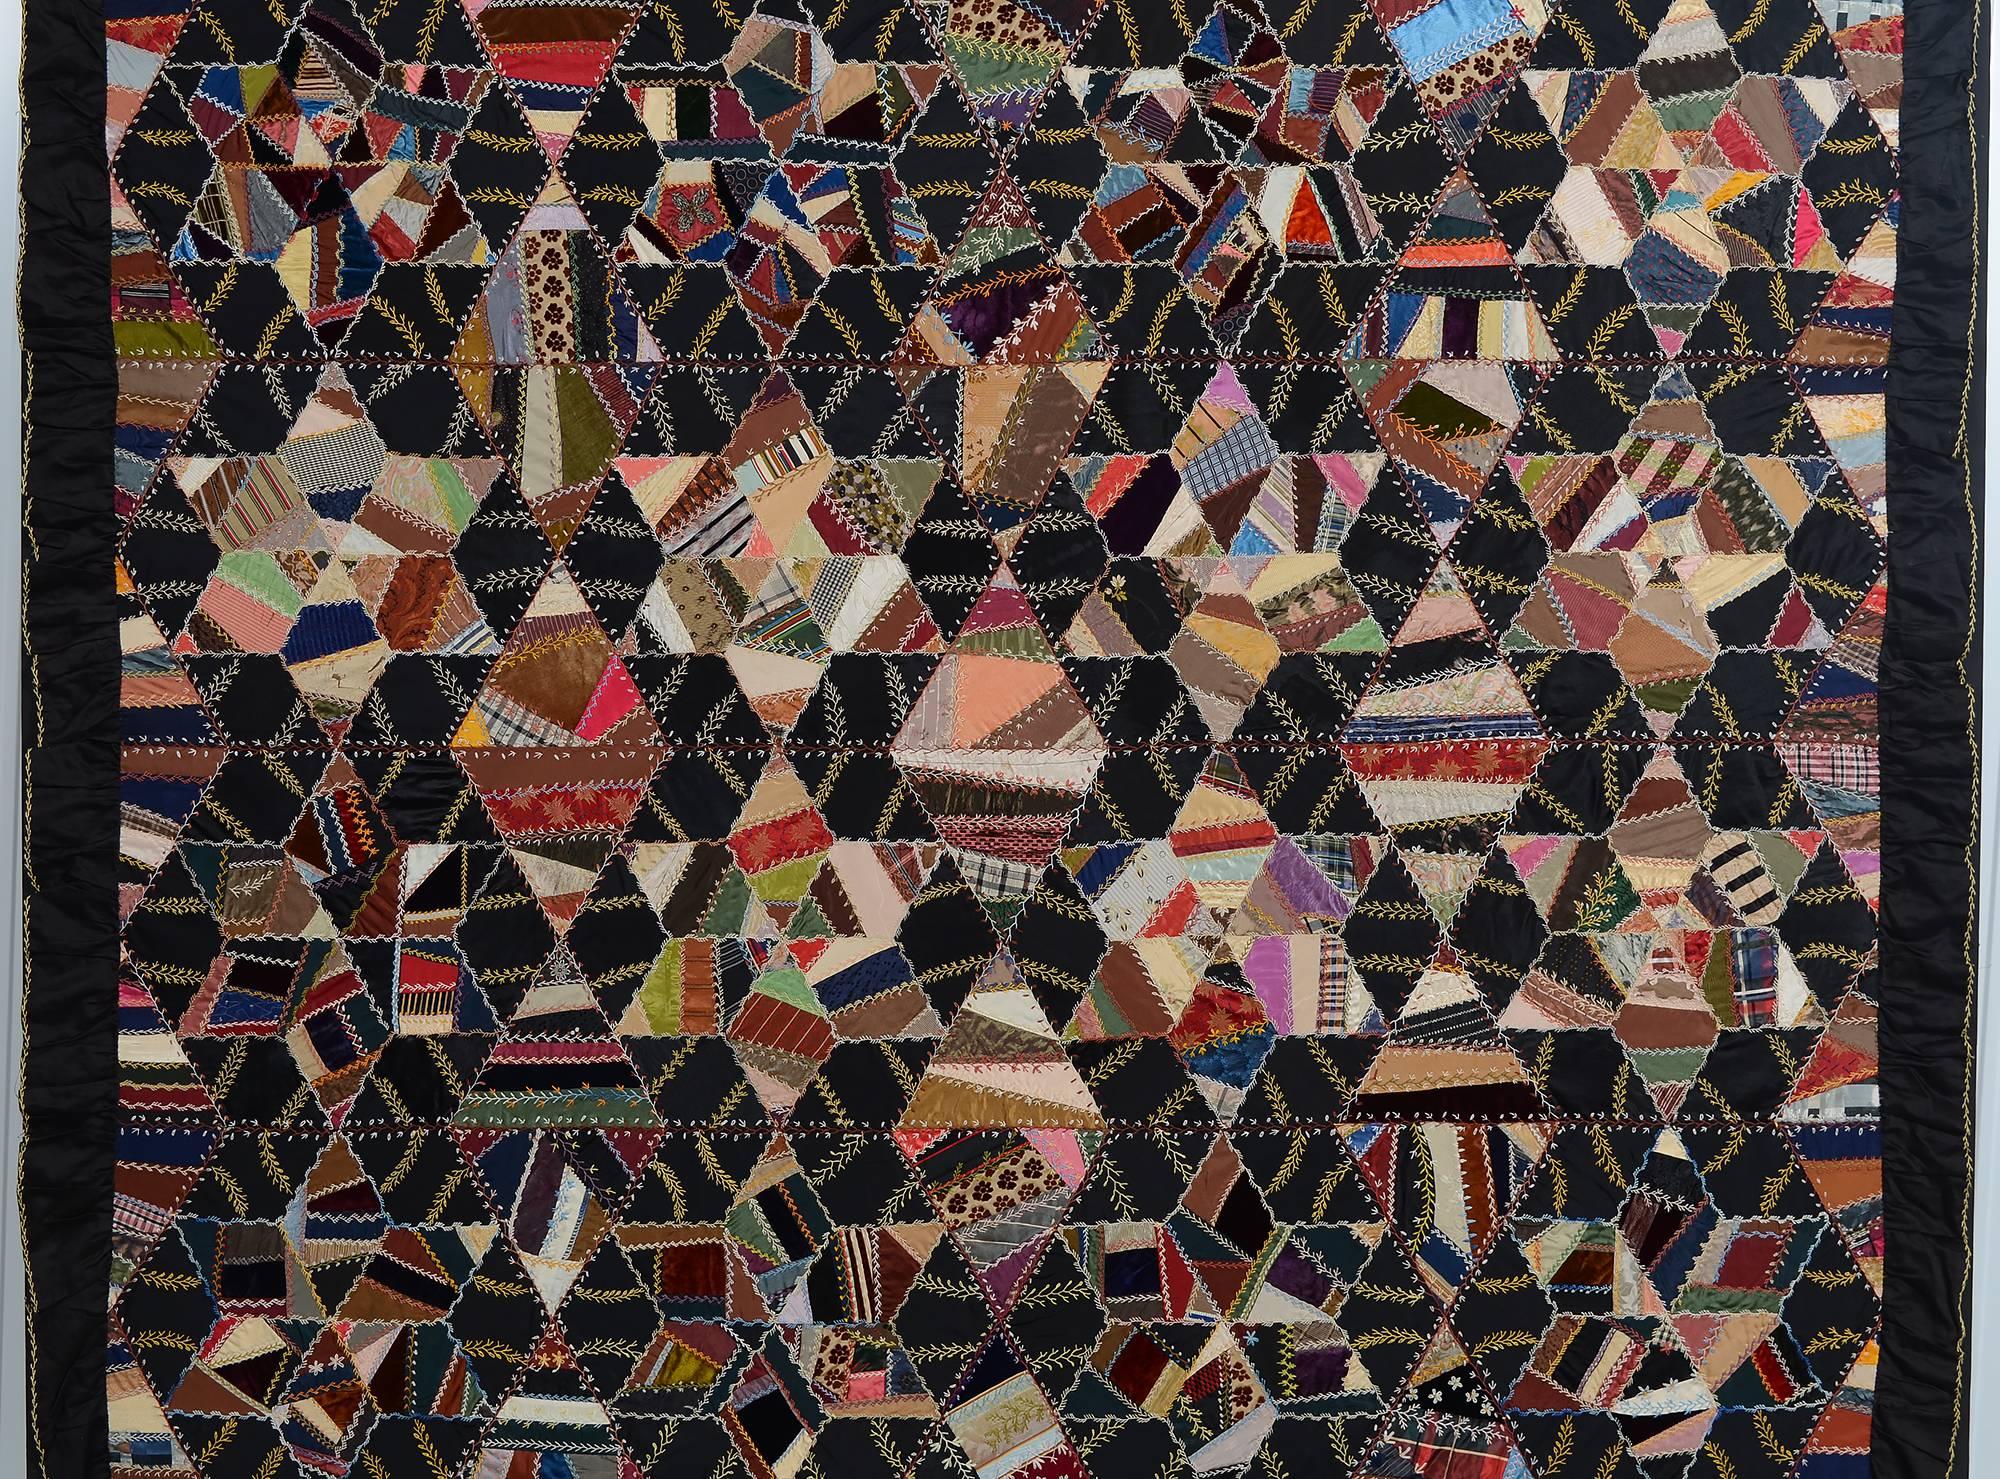 This elaborate Victorian quilt forms several different patterns. Primary is the tumbling blocks coordinating with stars and diamonds. The irregularly shaped pieces making up these patterns are highlighted with contrasting color embroidery. The quilt